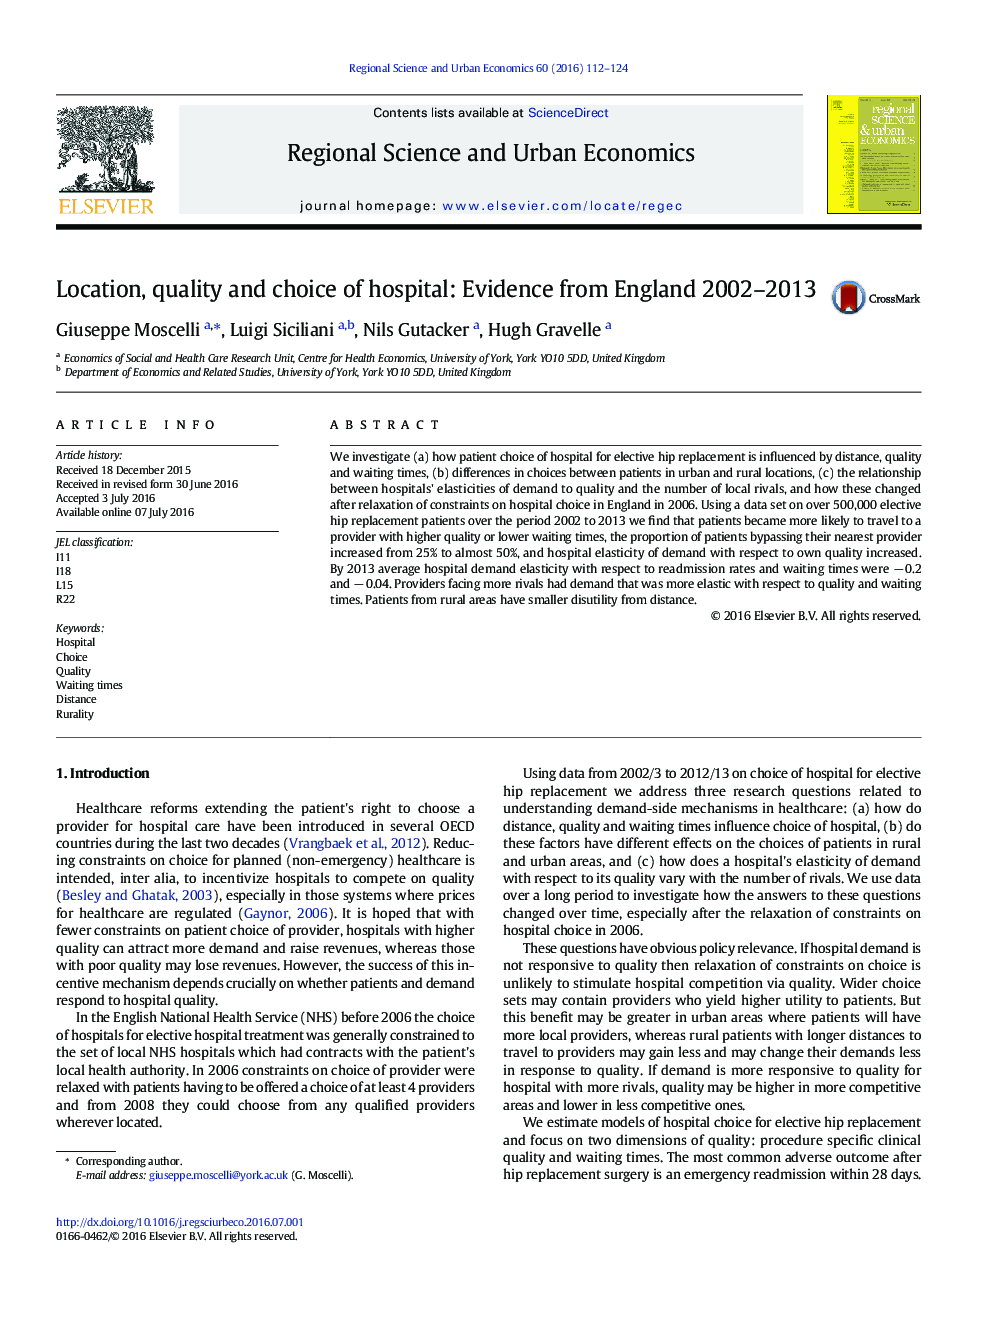 Location, quality and choice of hospital: Evidence from England 2002–2013